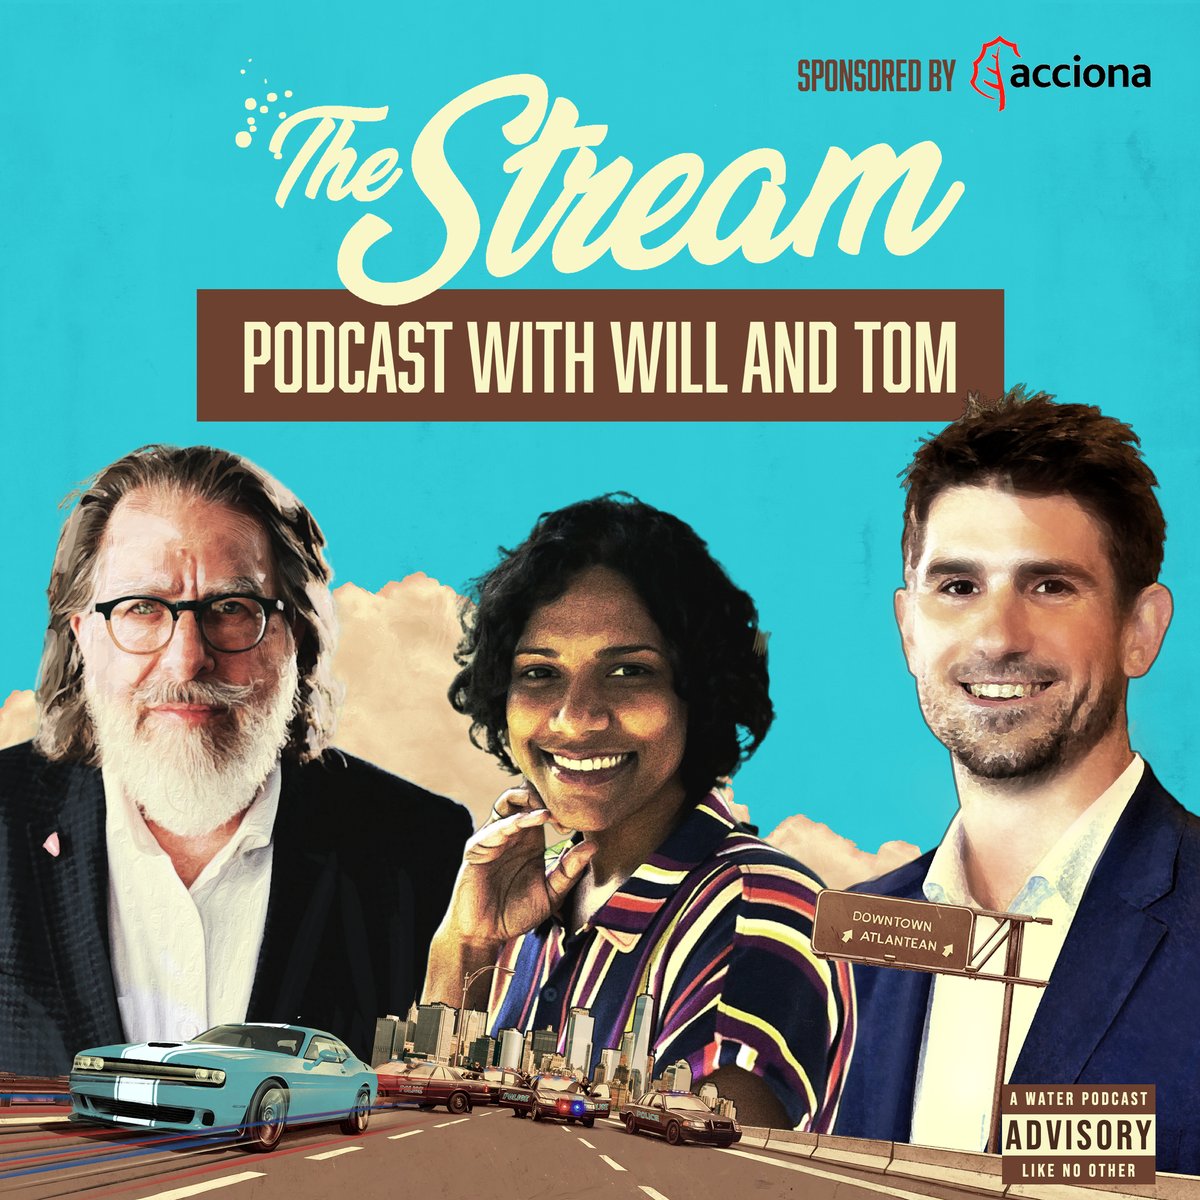 Miss the most recent episode of #TheStream?

The brilliant @kpenakok, Co-founder & CEO of #Dutch start-up @fieldfactors, joins @will_sarni & @TomFWater to discuss rethinking urban #water challenges.

Watch the full episode now: ow.ly/V4Cq50MuMX2